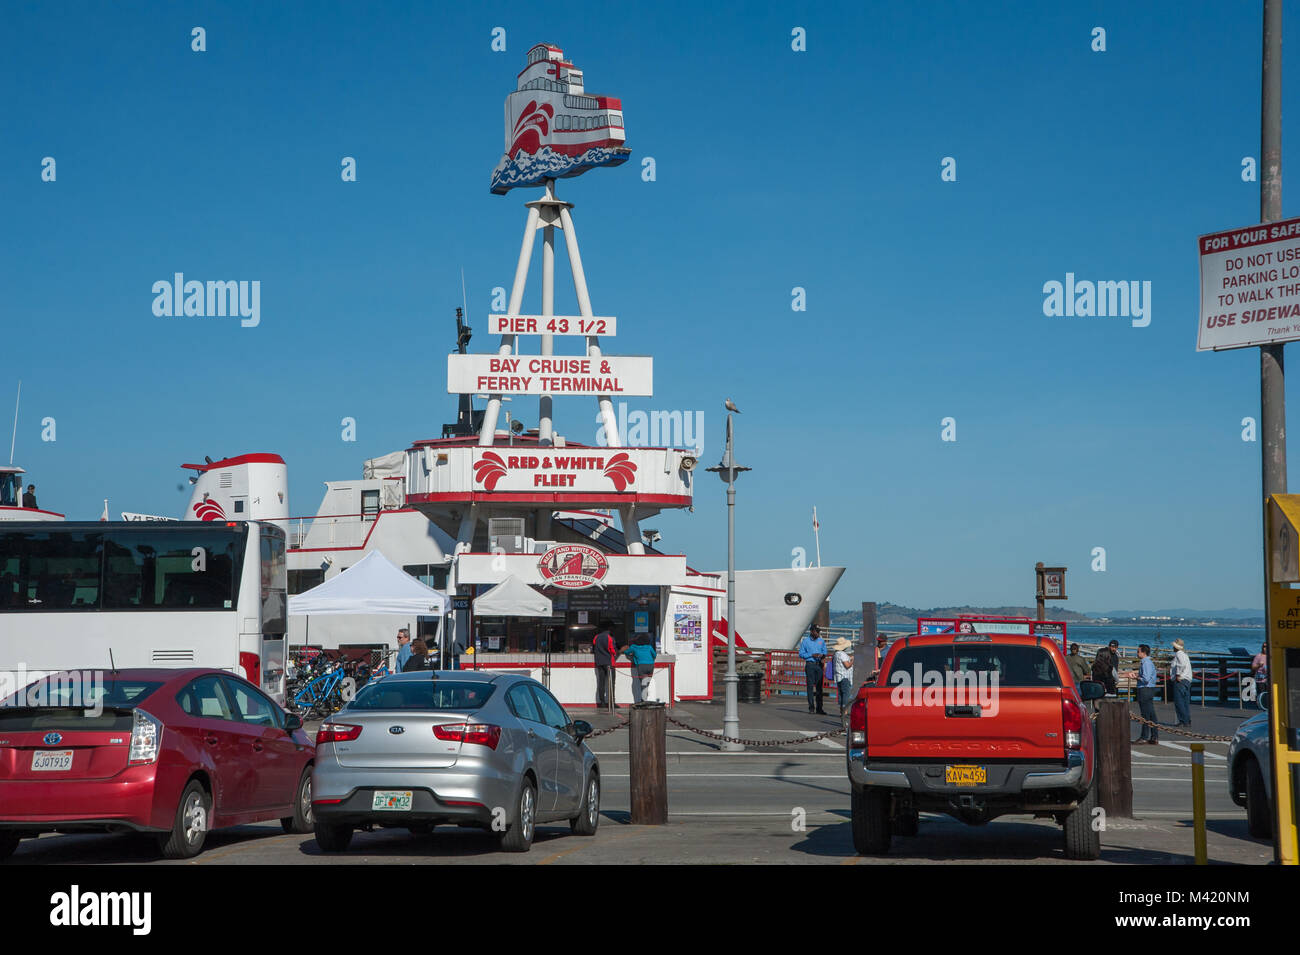 San Francisco, CA - February 03: Red and White Fleet's cruise and Ferry Terminal located in San Francisco's Fisherman's Wharf District Stock Photo